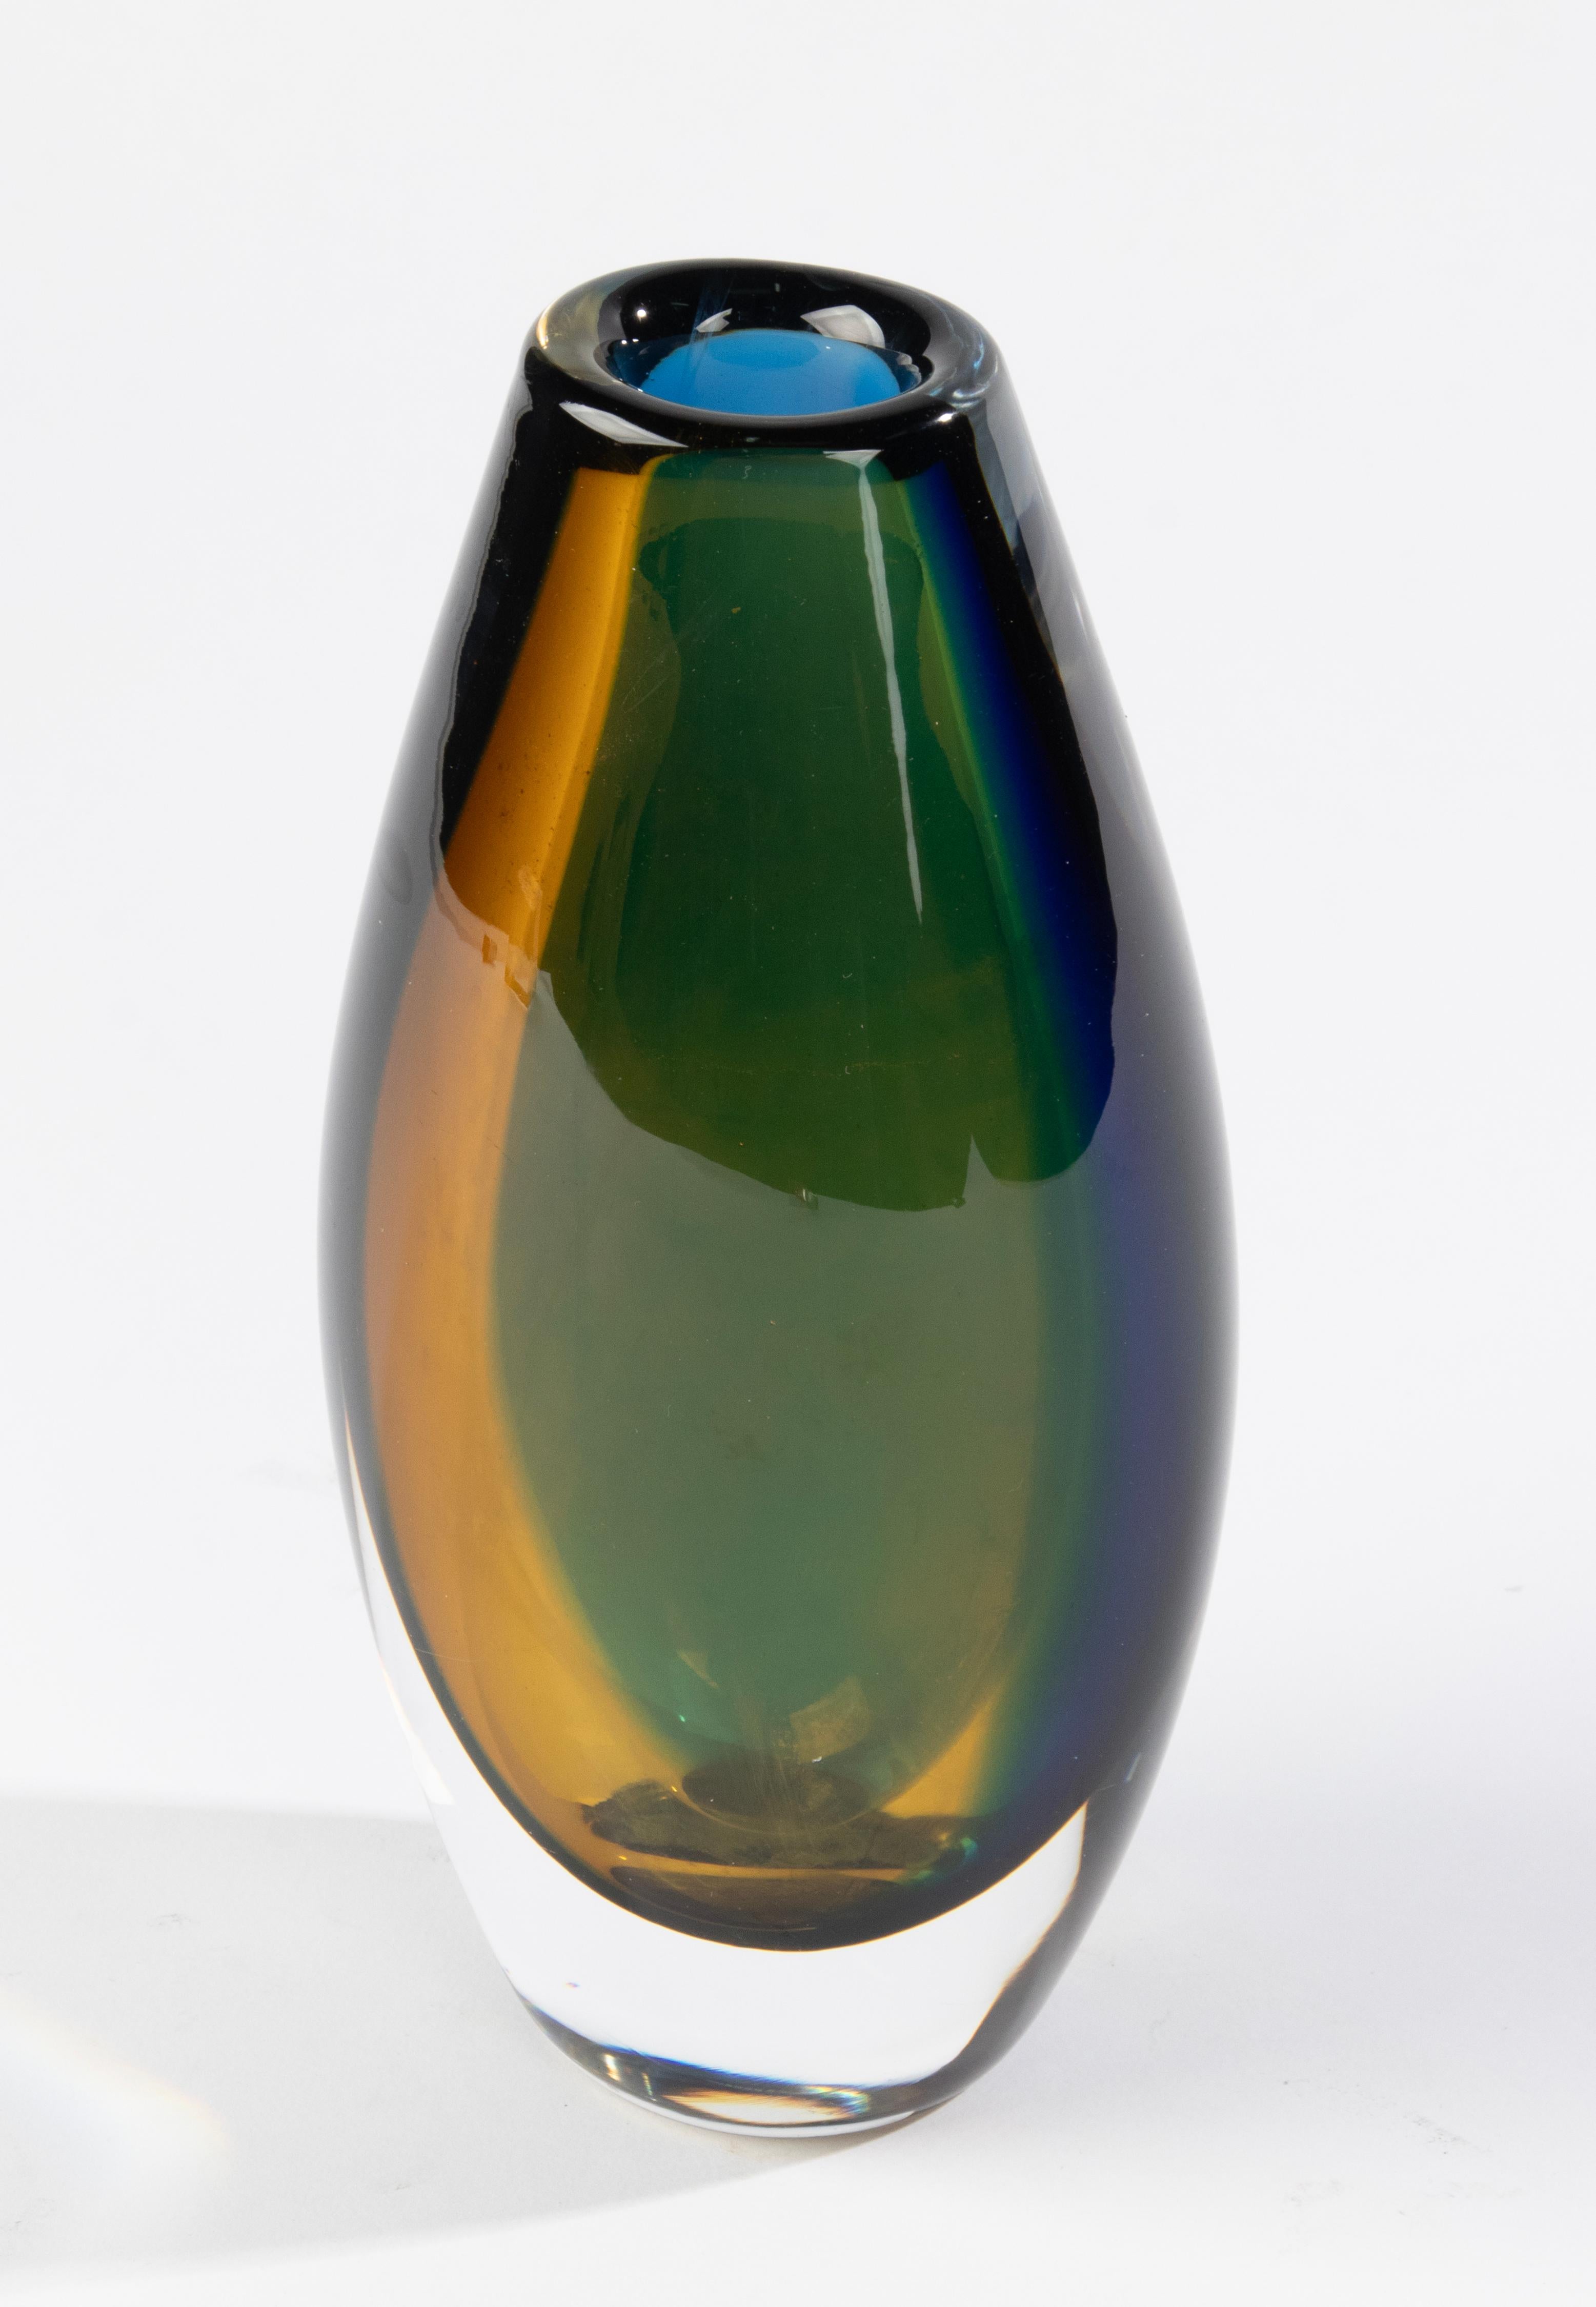 A beautiful art glass sommerso vase, designed by the well known artist Vicke Linstrand for Kosta of Sweden in approximately 1965 in the period Mid-Century Modern style. The vase was created using a similar technique used in Murano glass called